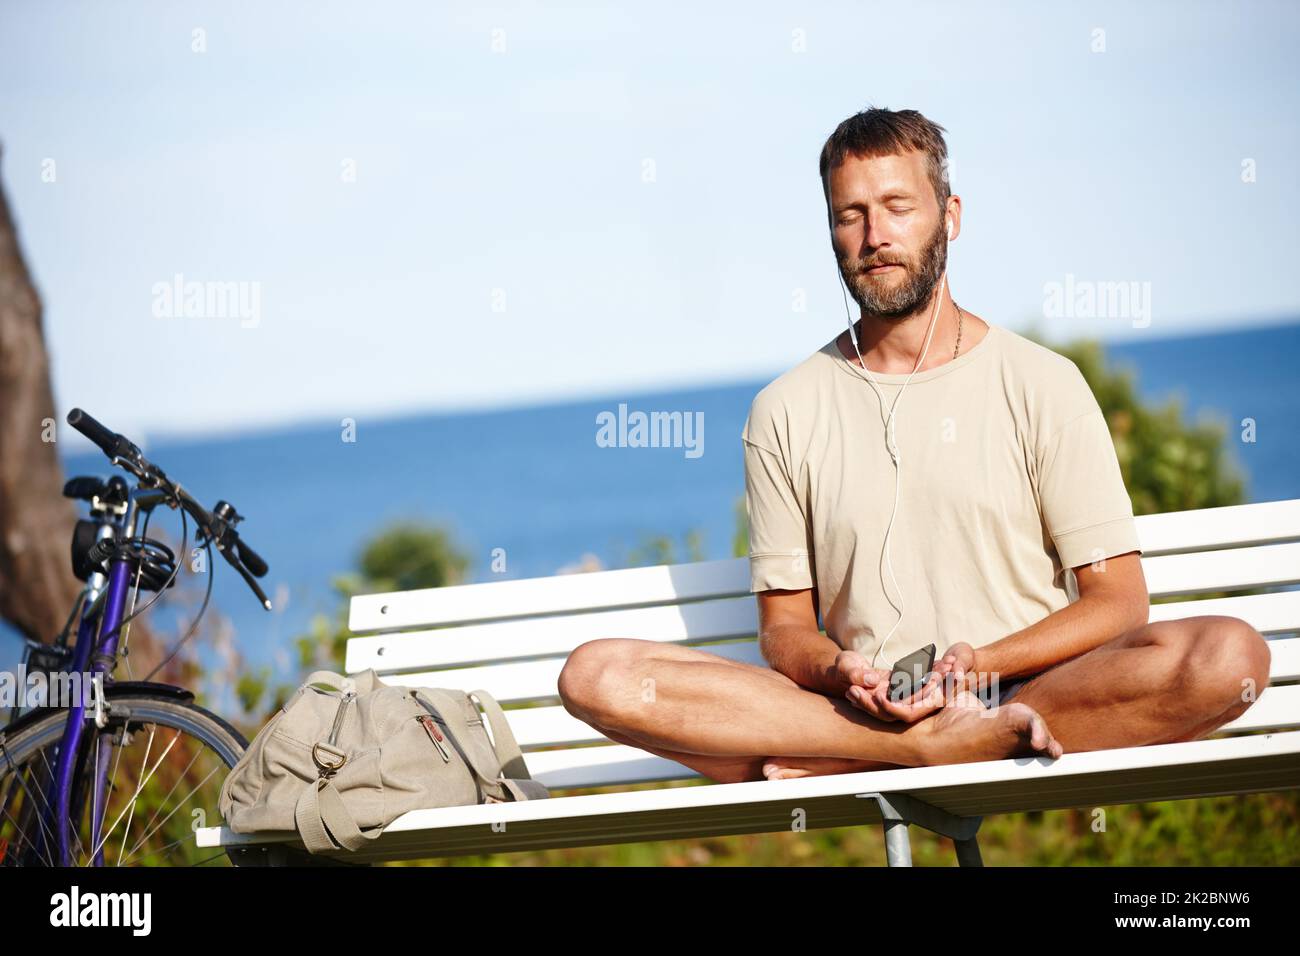 He cycled to his place of calm. Shot of a mature man listening to music while doing a relaxation exercise outdoors. Stock Photo